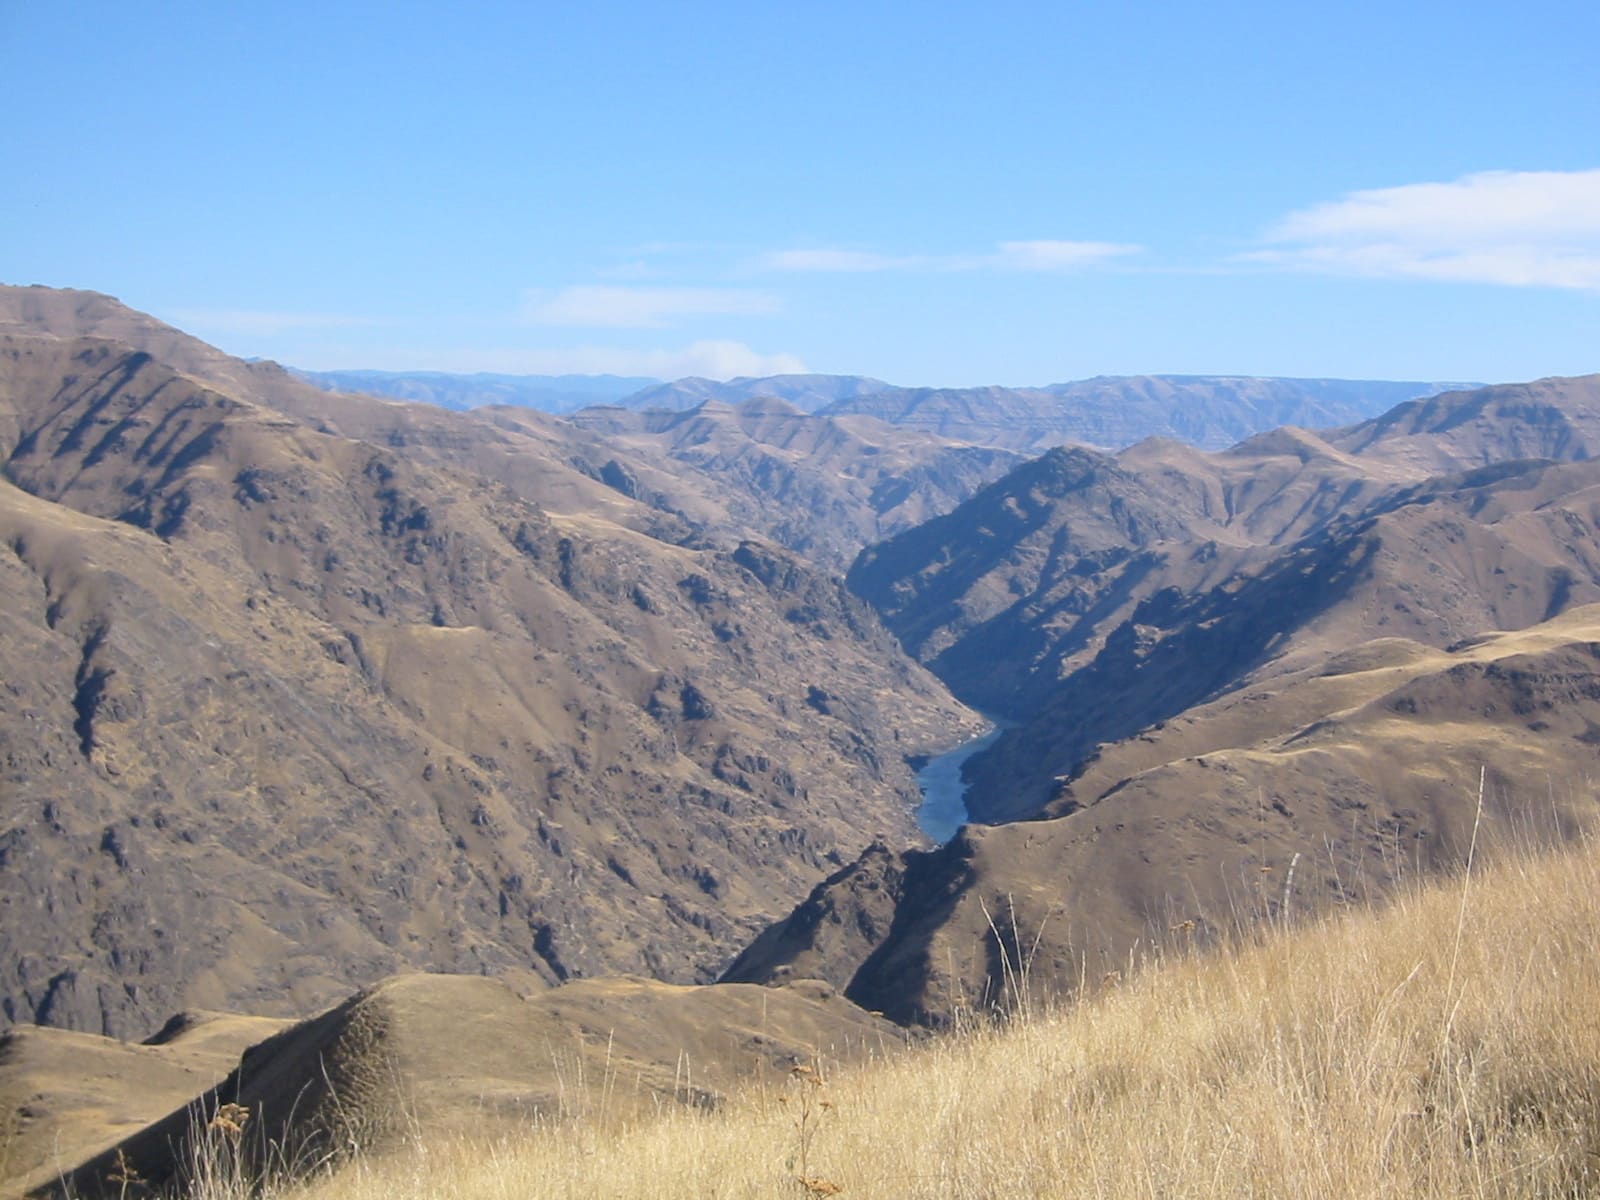 A view of Hells Canyon in Idaho.